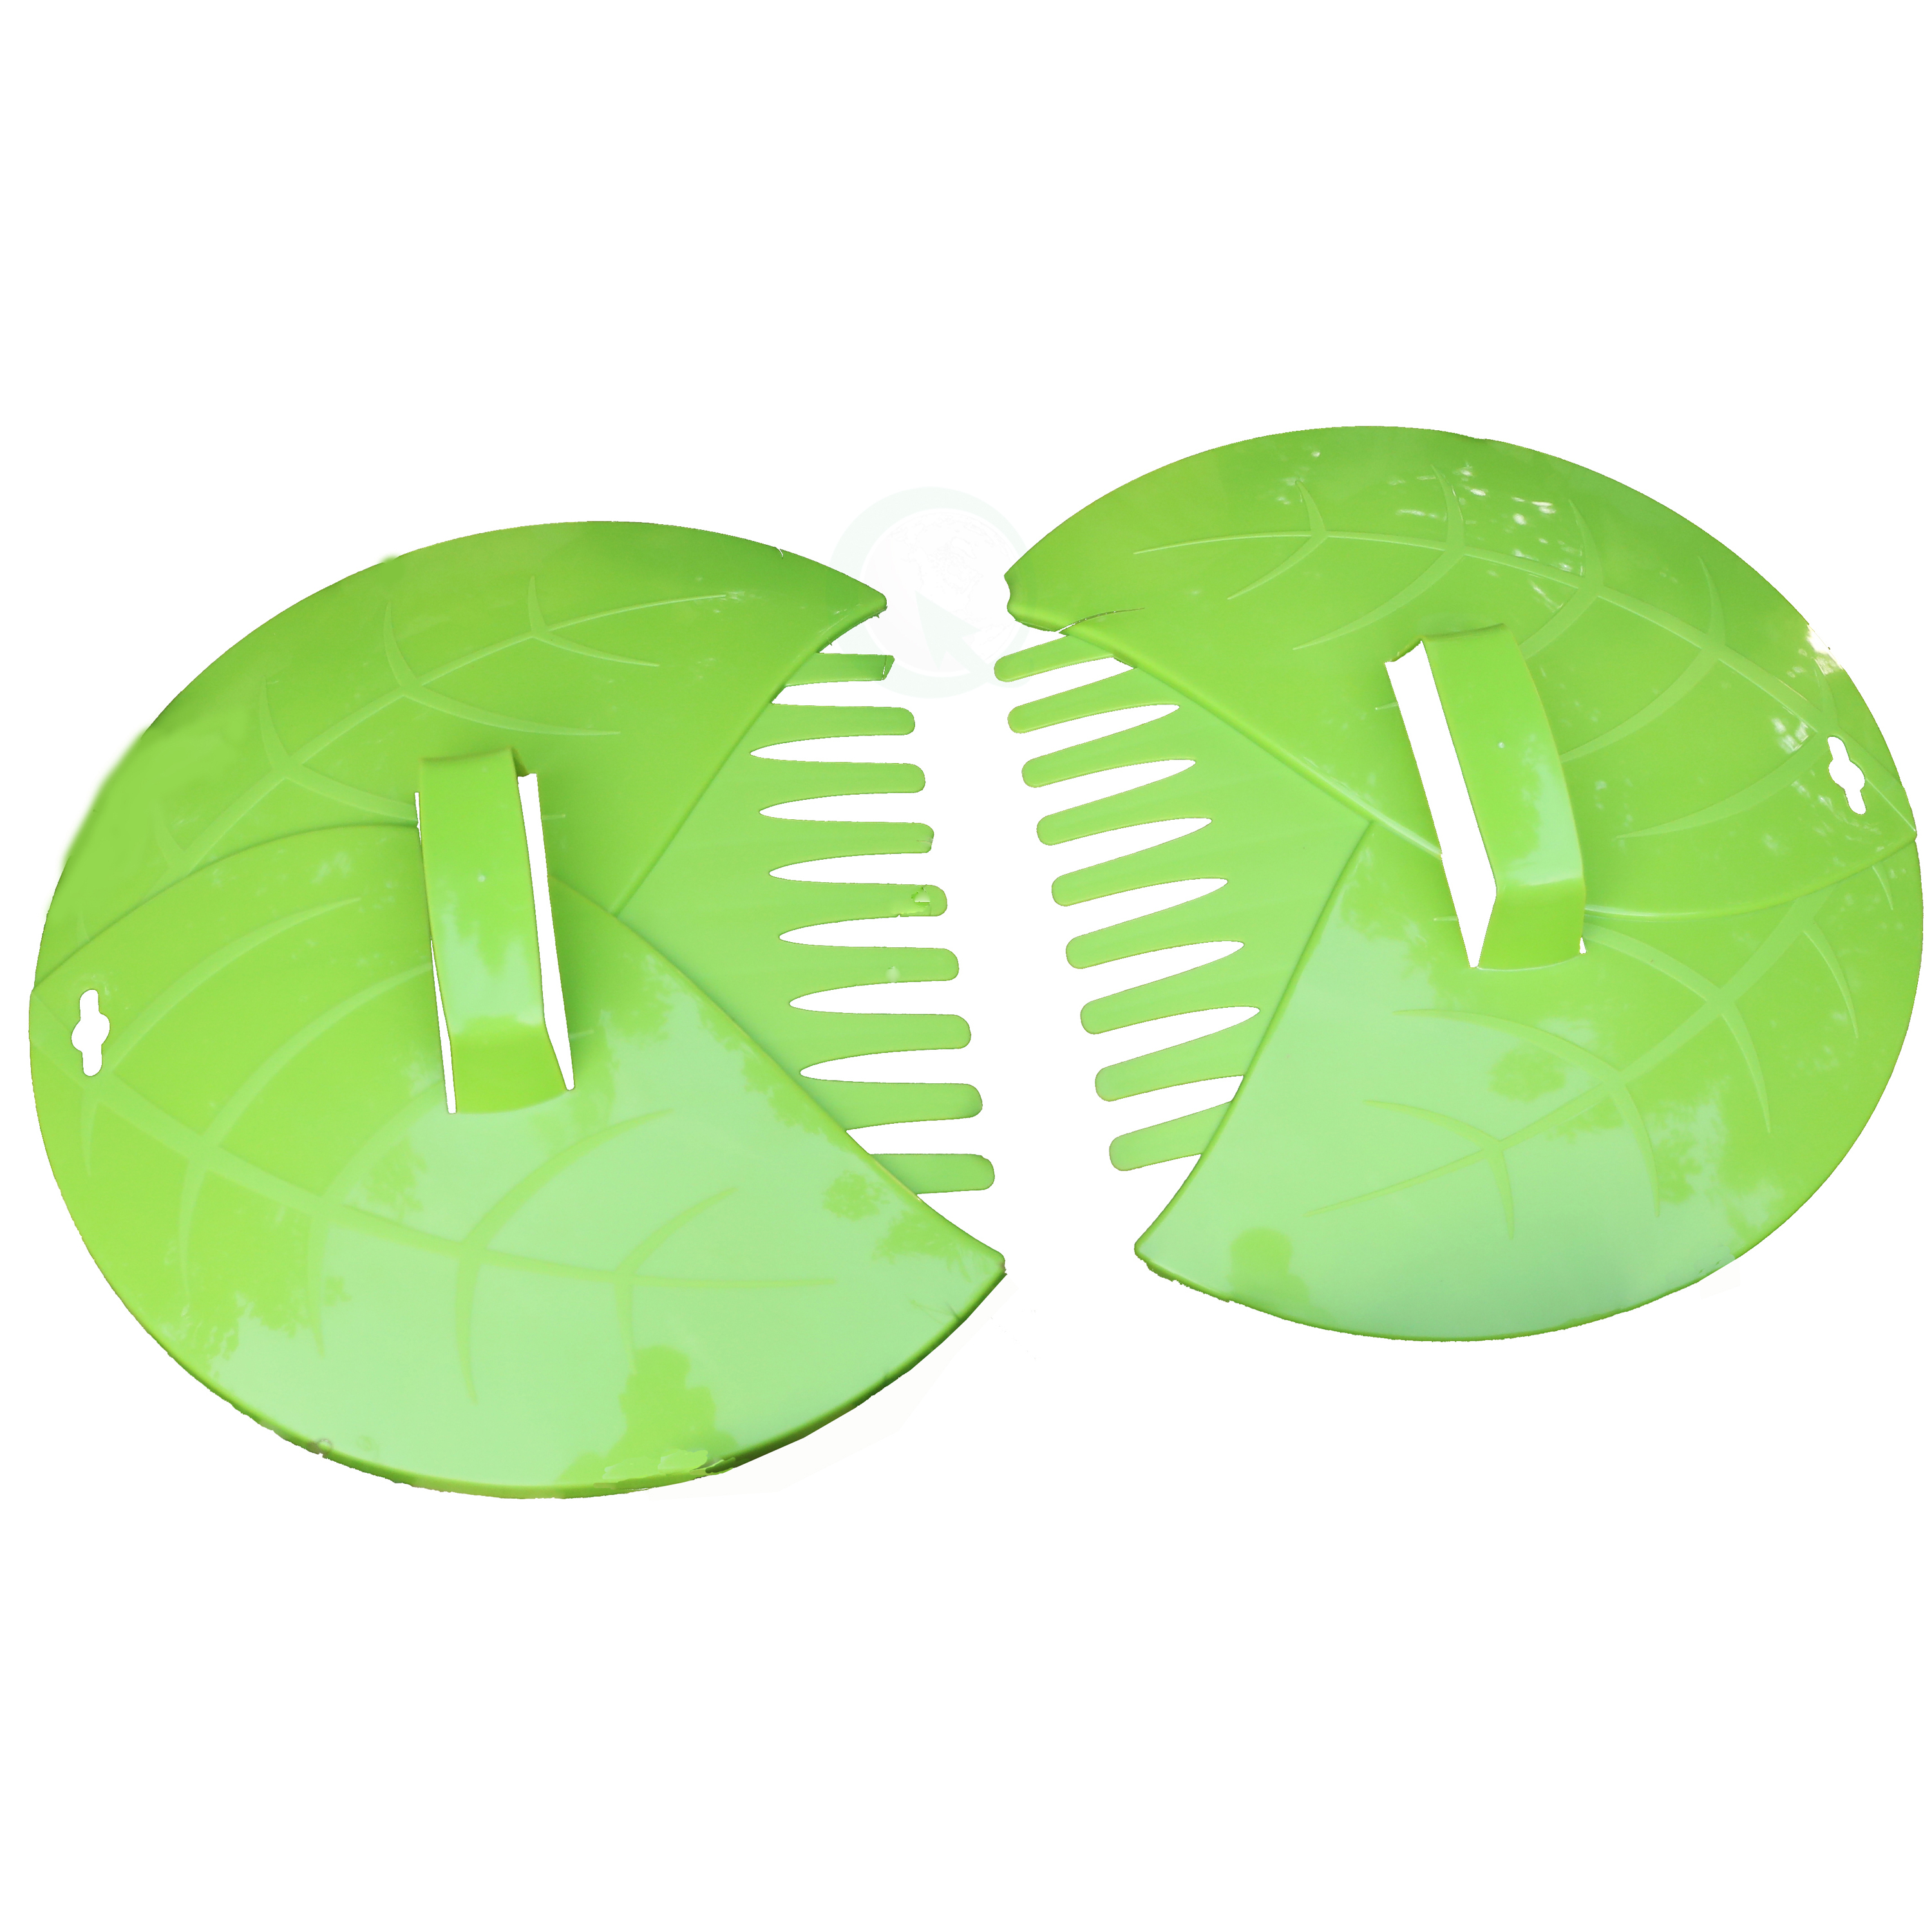 Decorative Pair Of Leaf Scoops, Hand Rakes For Lawn And Garden Cleanup - Green